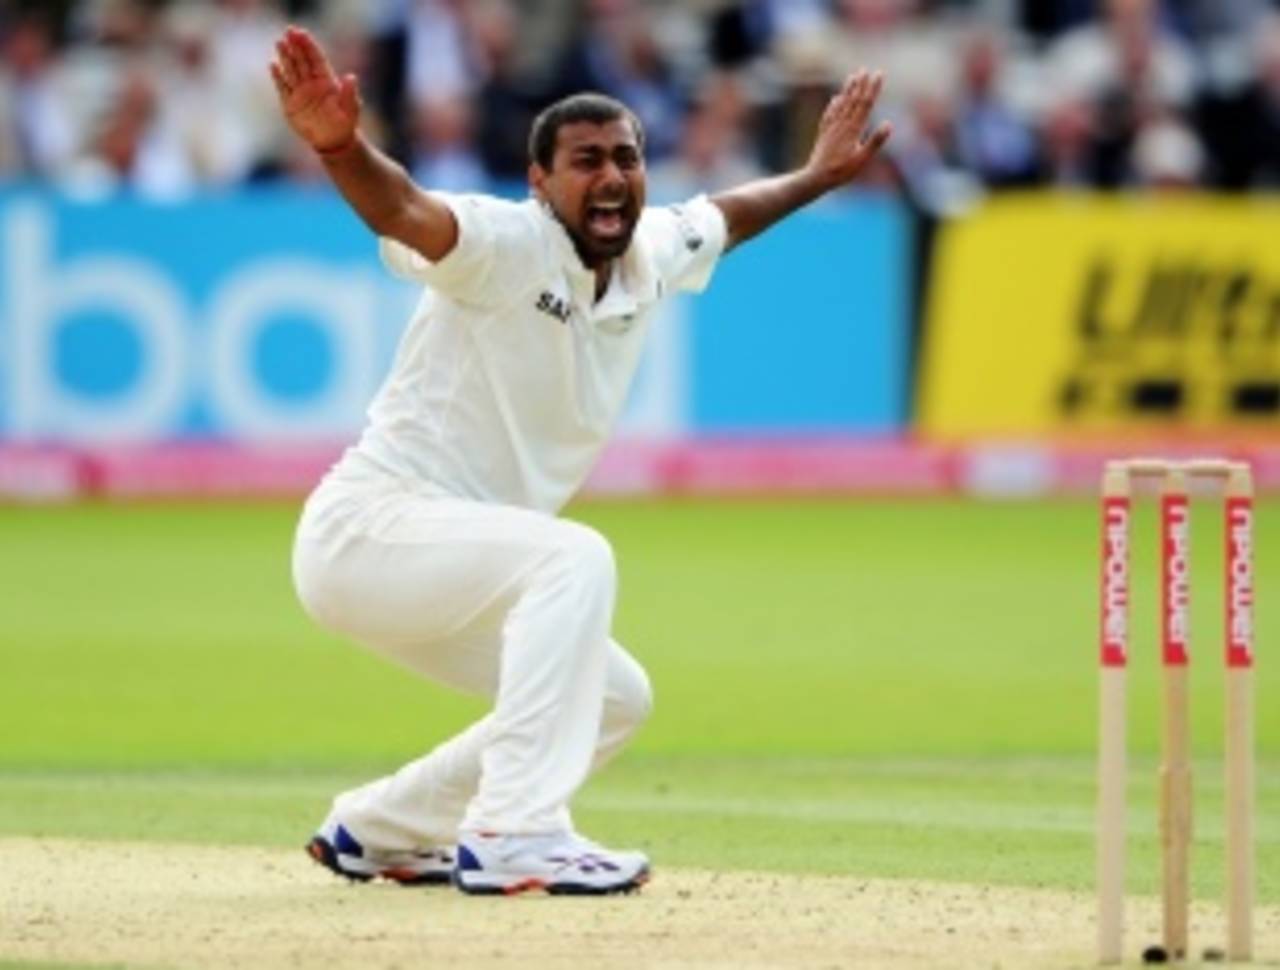 Praveen Kumar got on the honours board with a five-for, England v India, 1st Test, Lord's, 2nd day, July 22, 2011